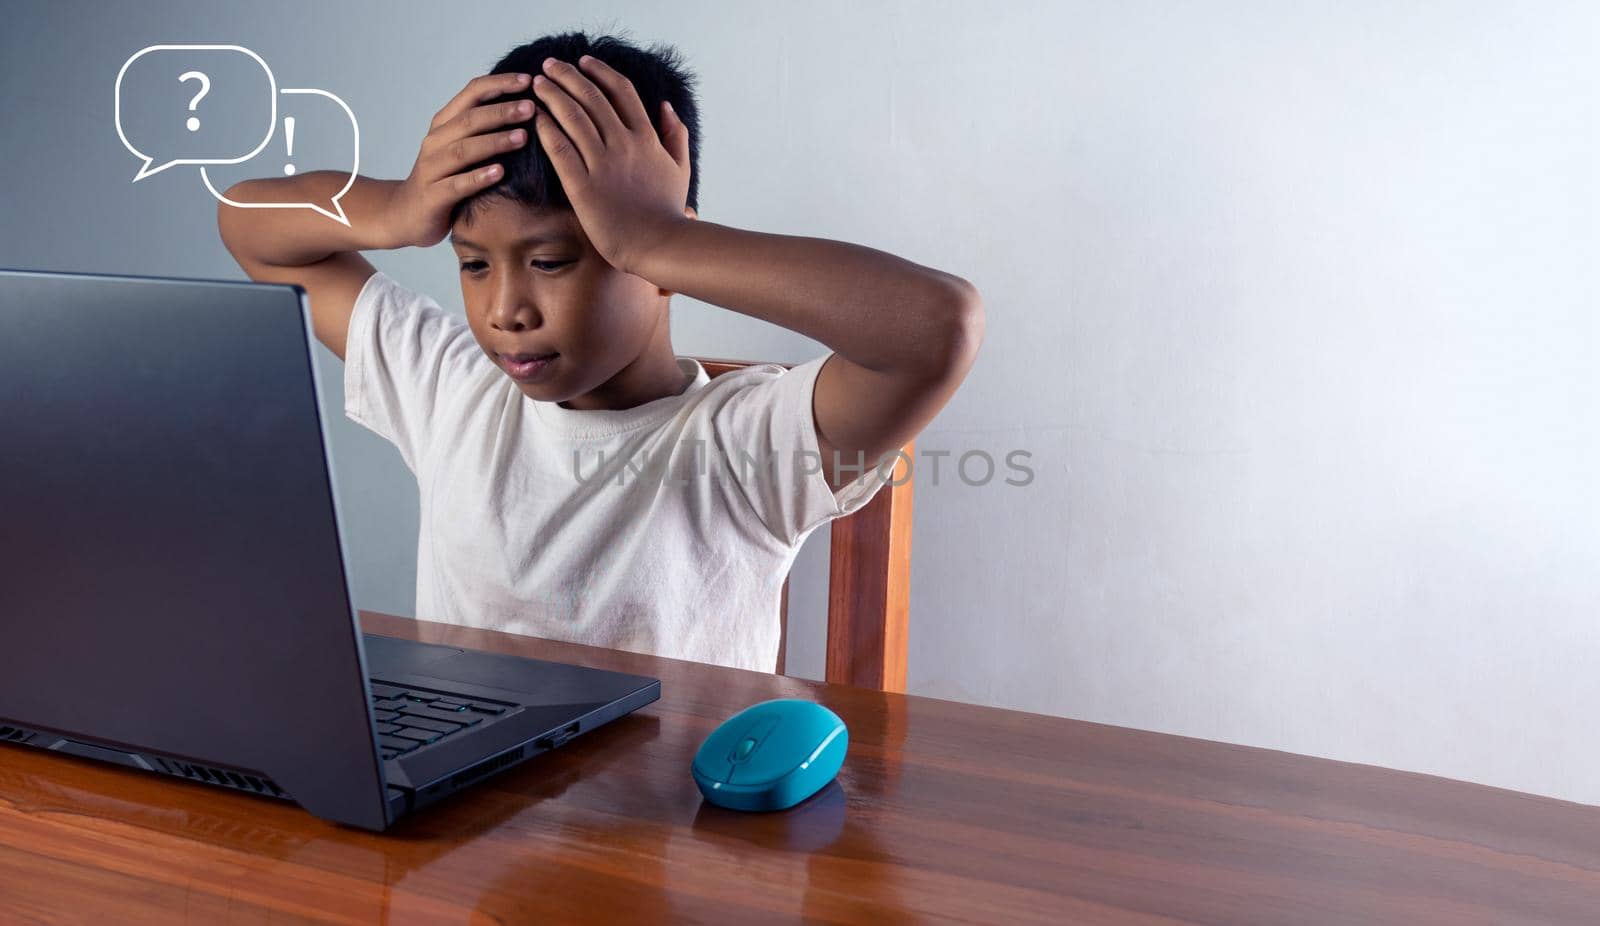 Education concept image. Creative idea and innovation. the boy sat staring at the computer and touched his temple. represents the inability to think by Unimages2527